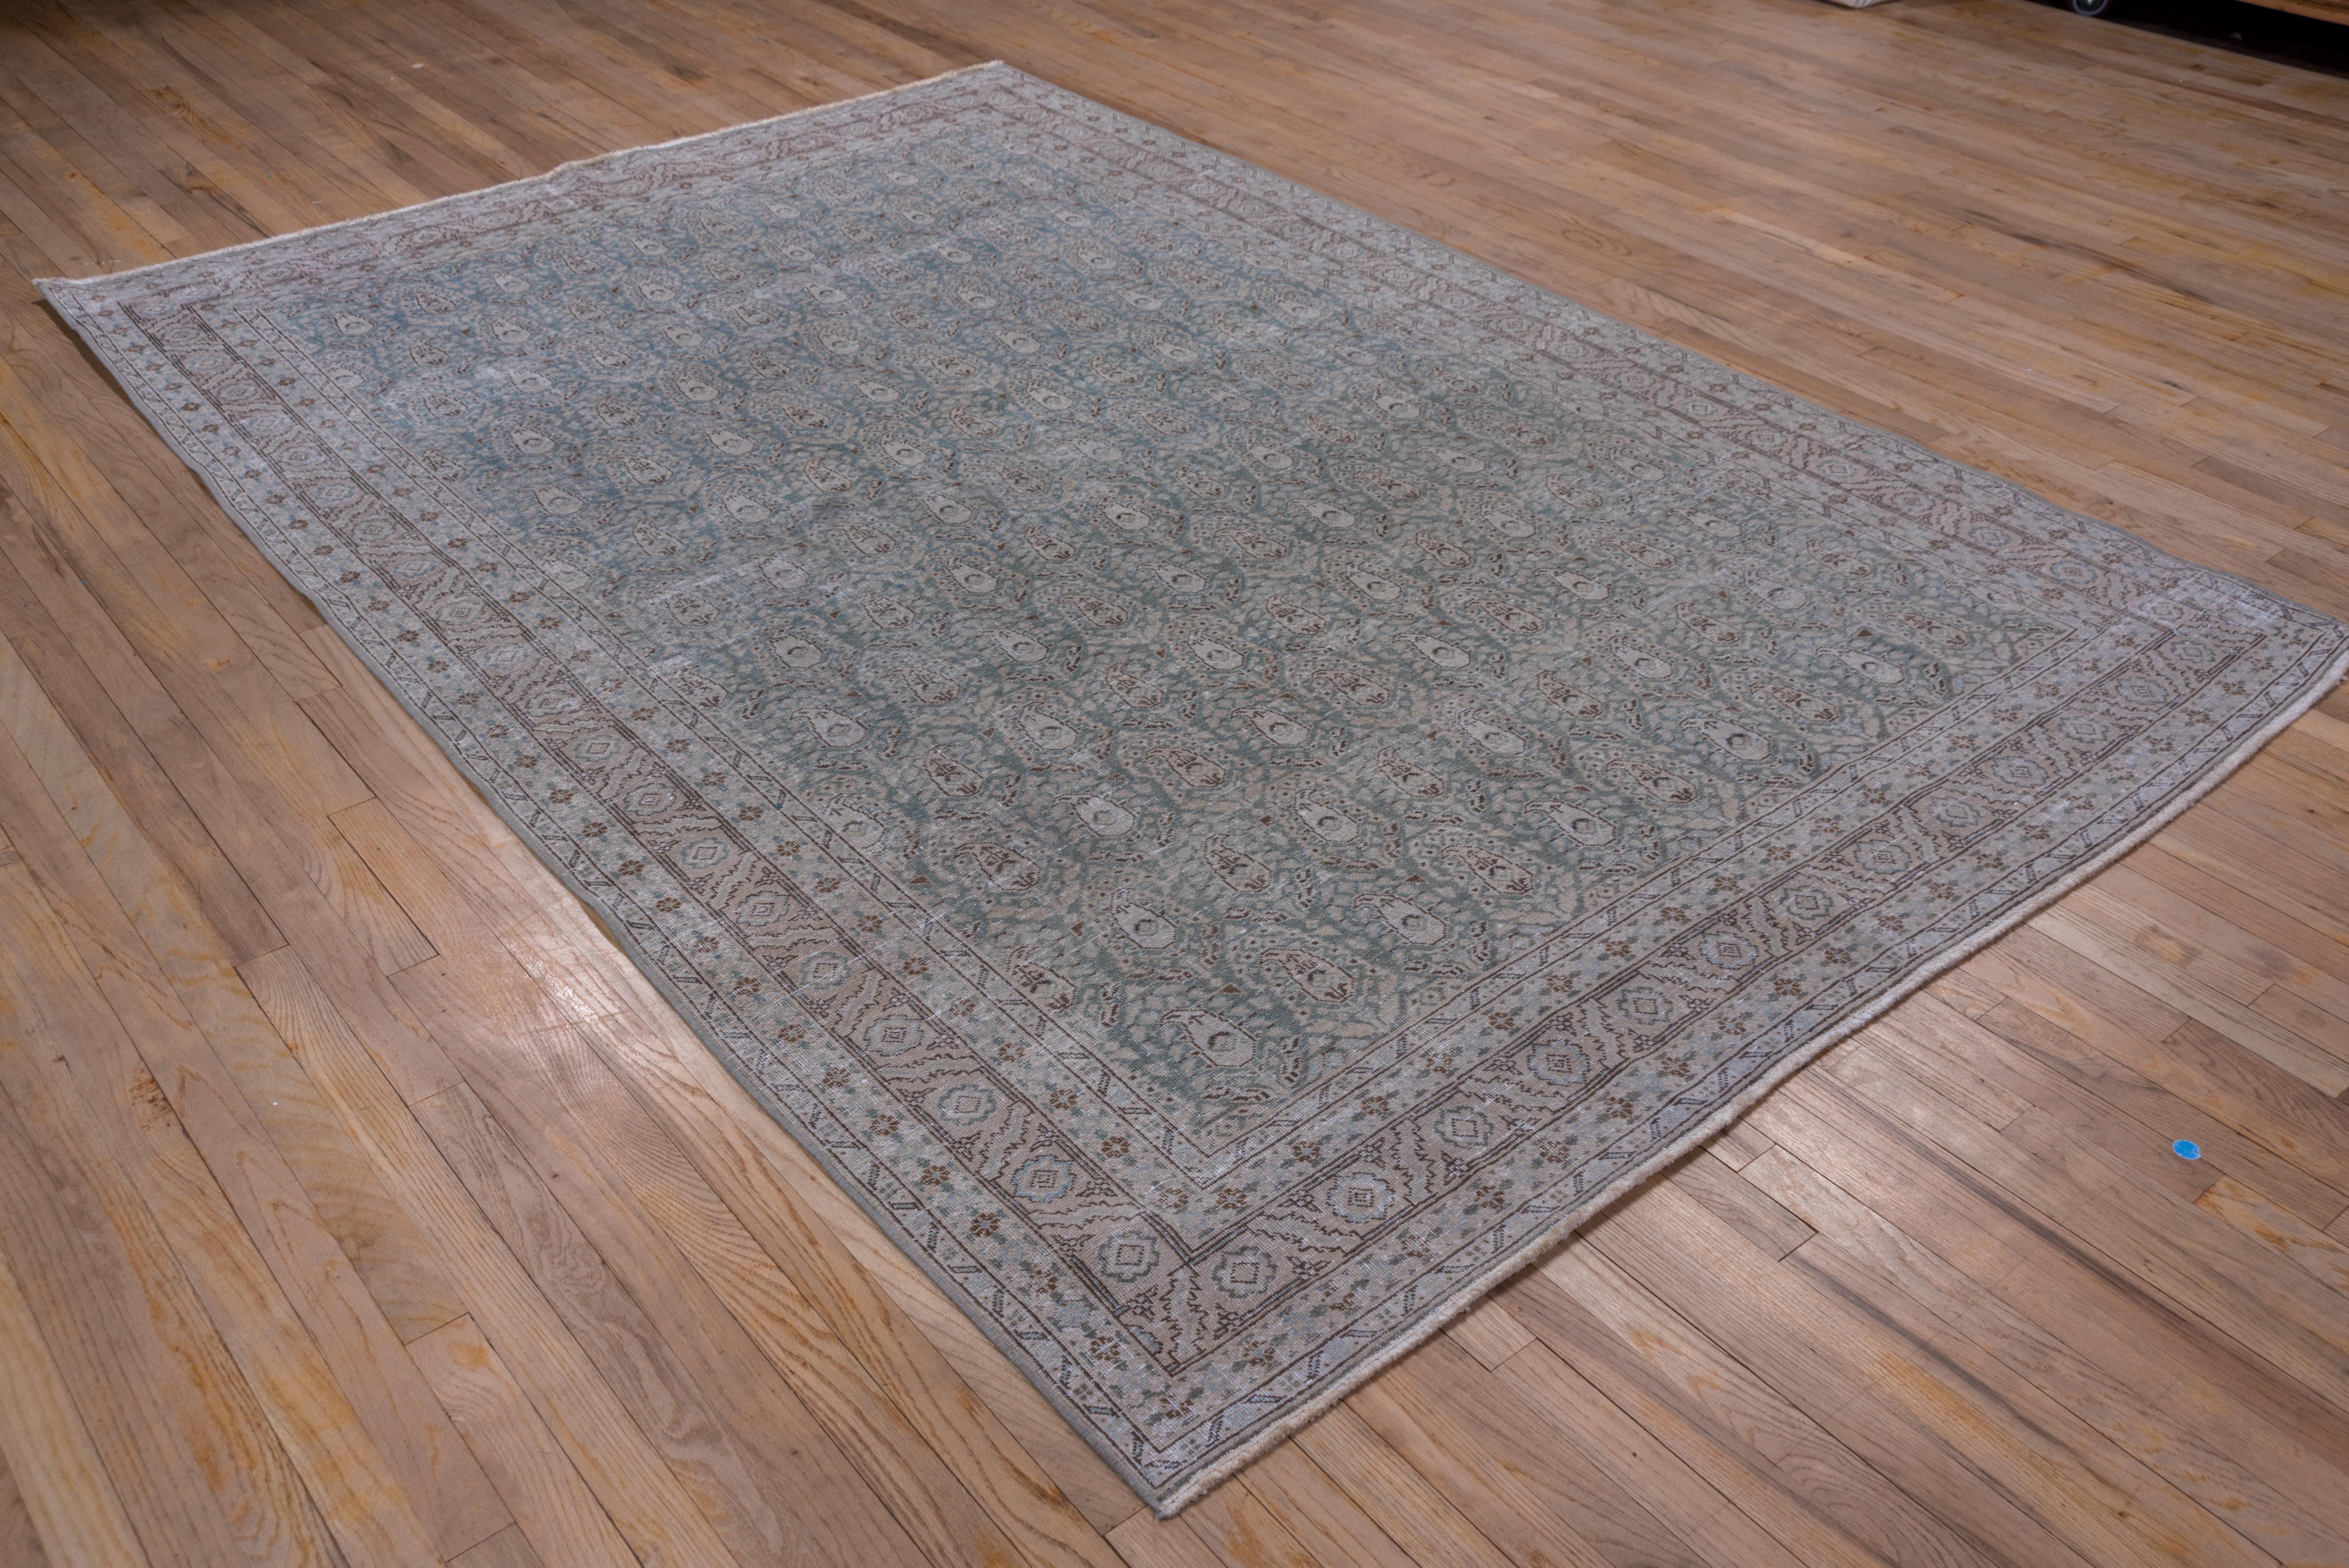 Wool Antique Gray & Blue Persian Tabriz Rug, Paisley Allover Field For Sale